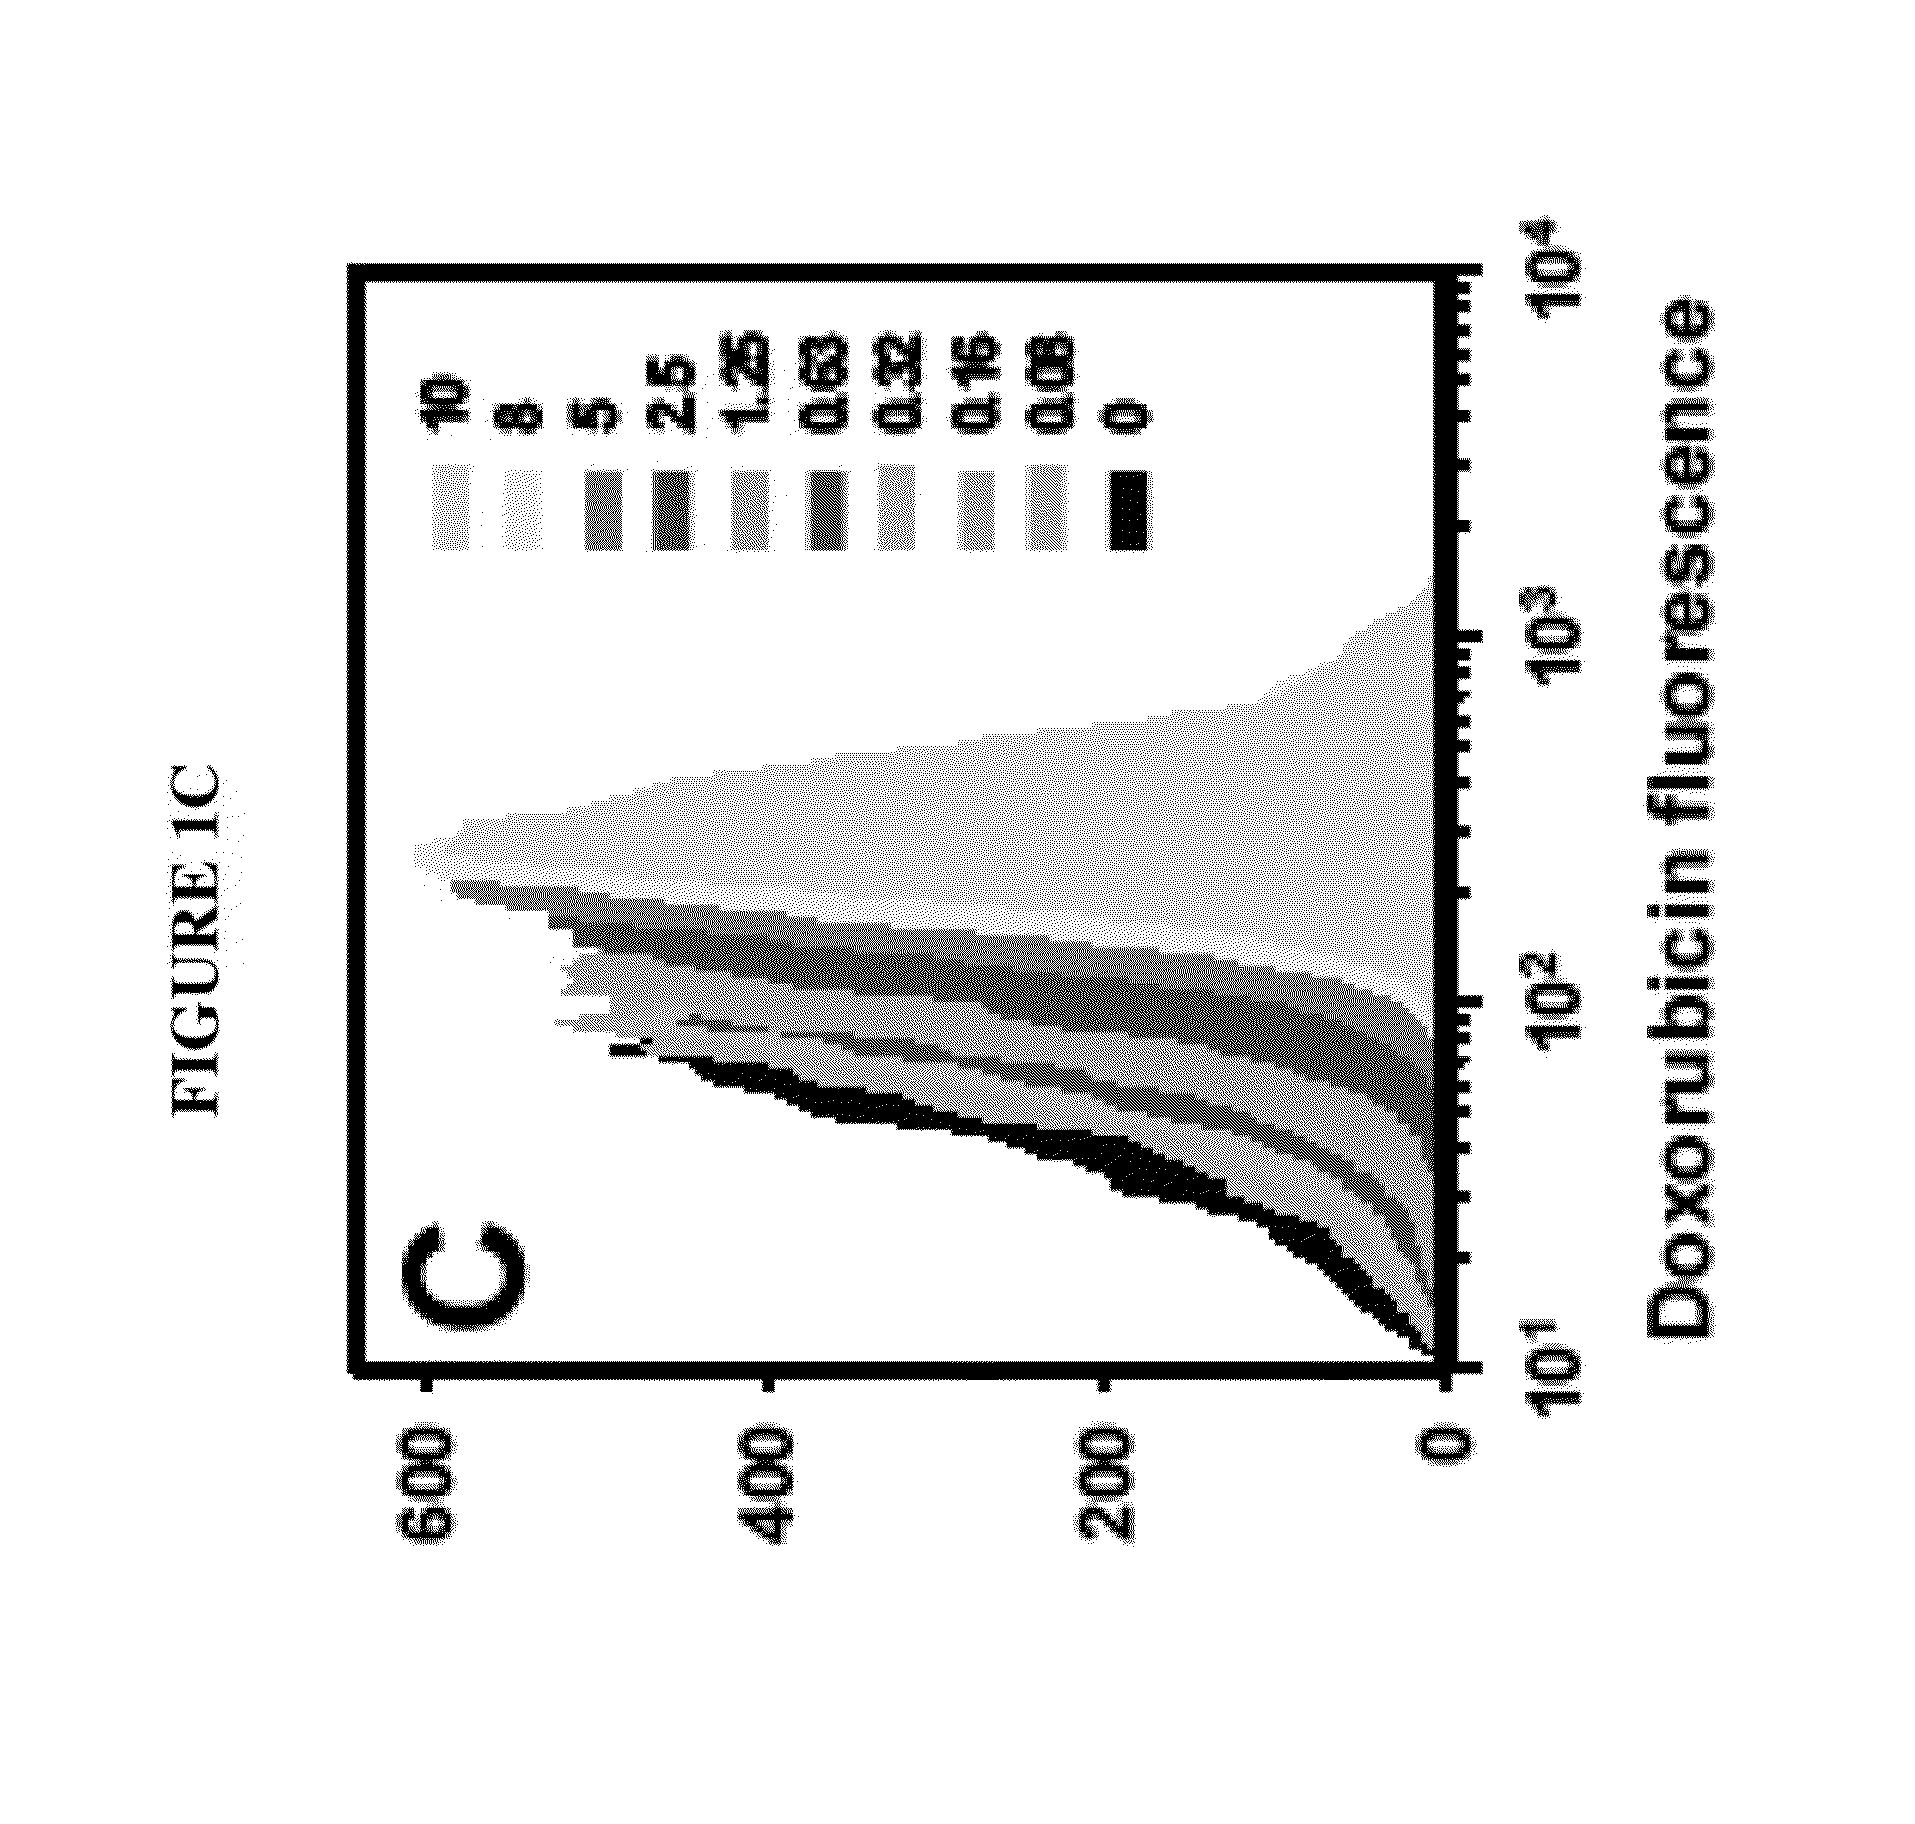 Methods and systems for determining the distribution of radiation dose and response